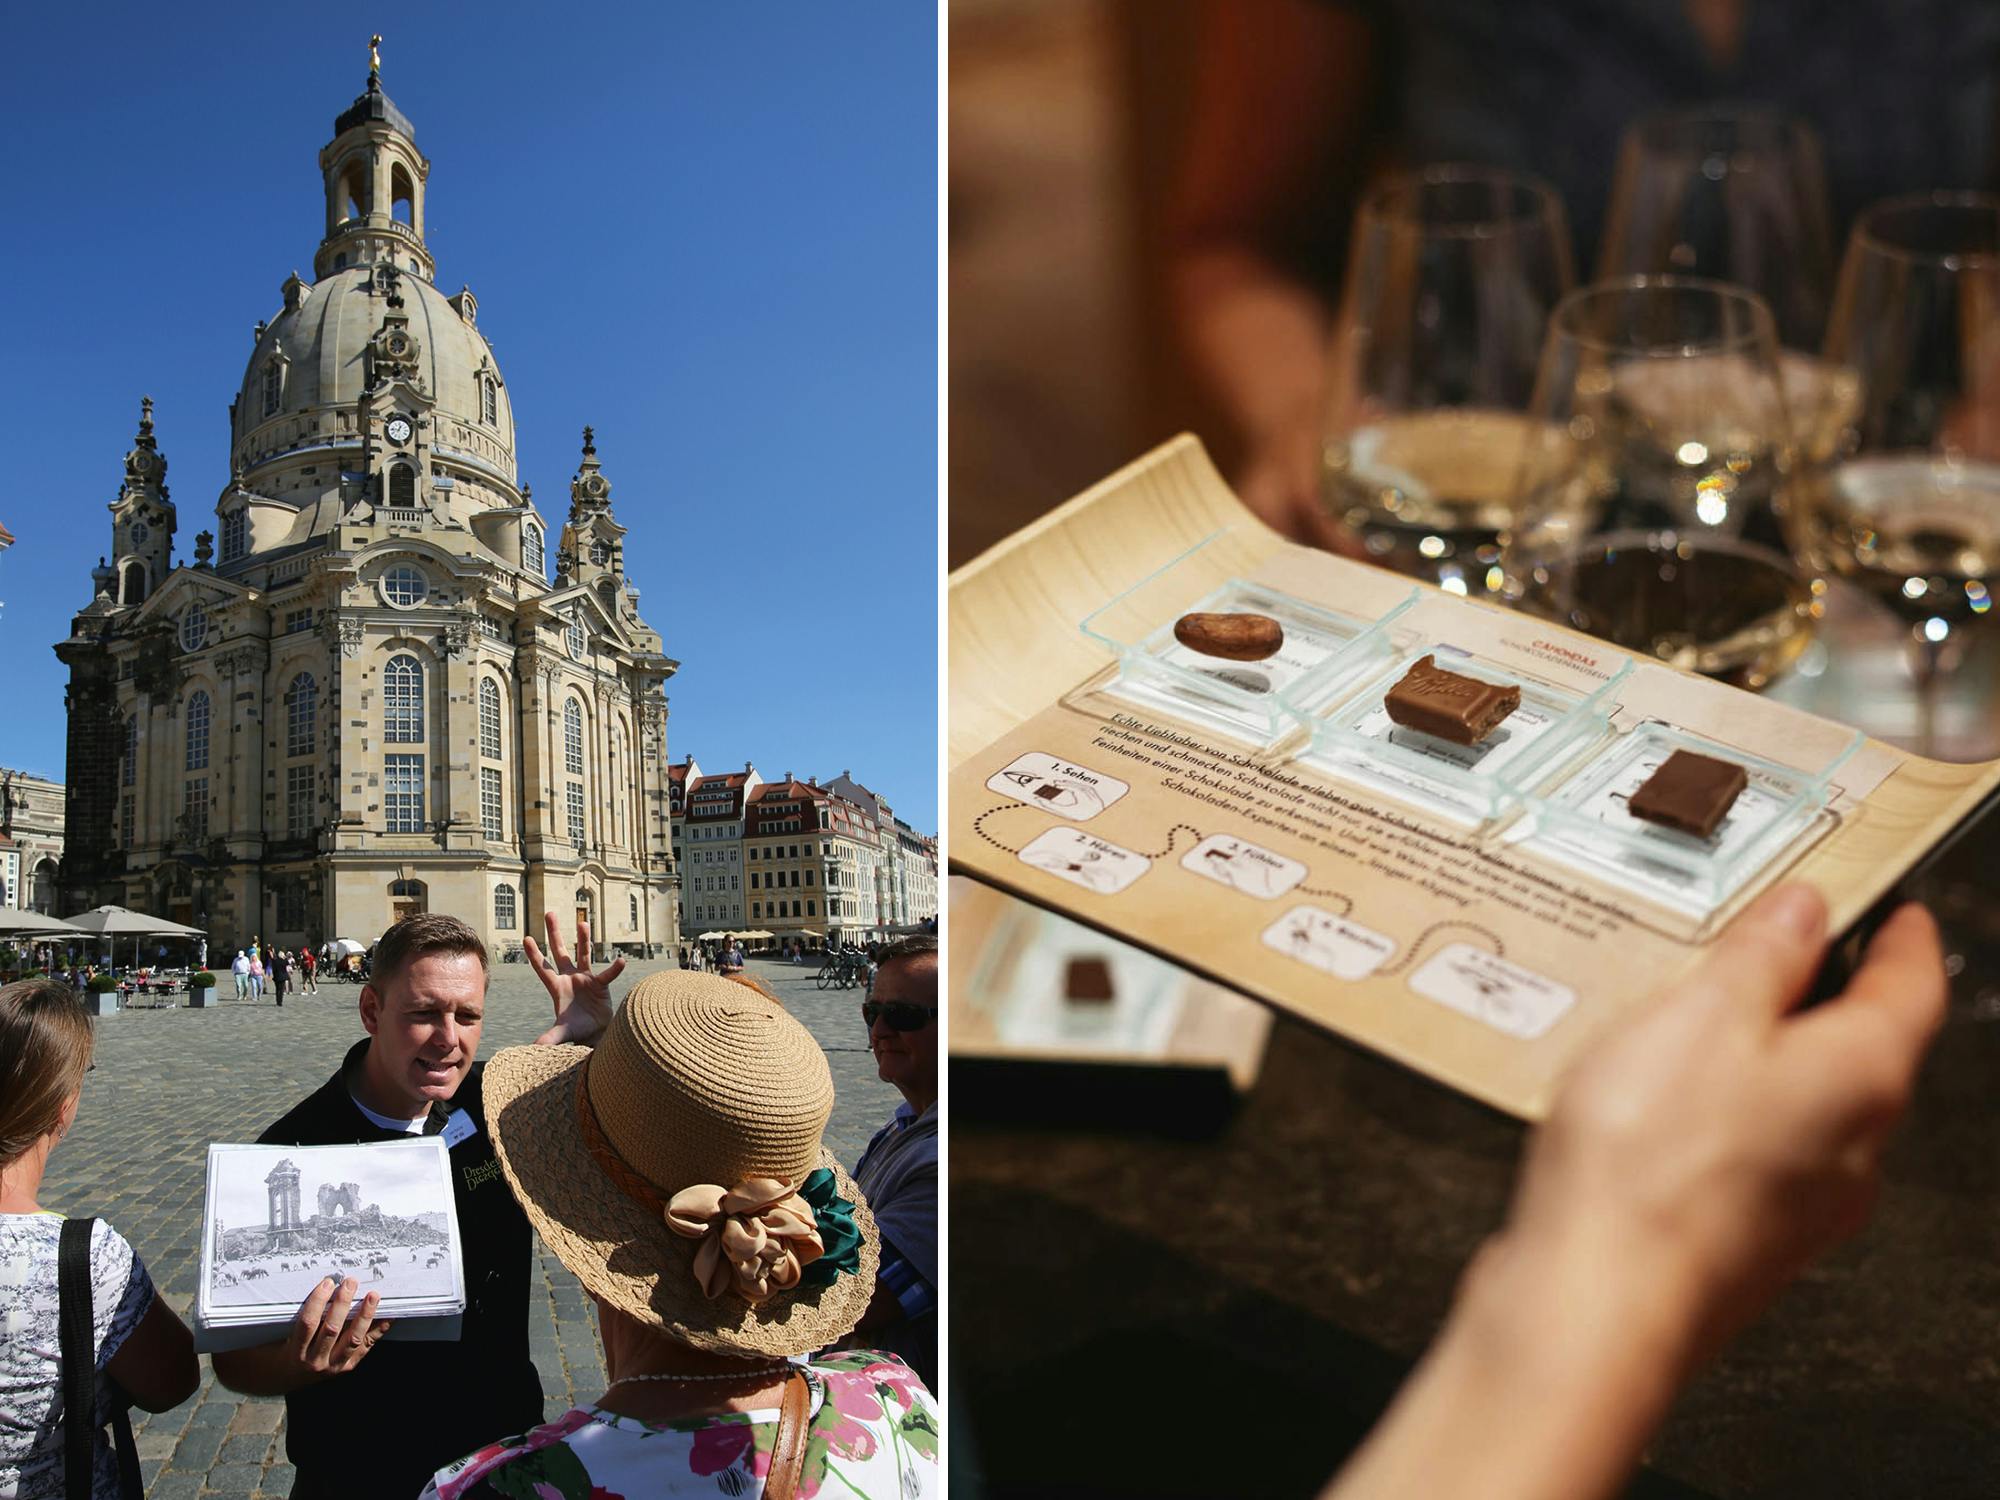 Dresden historical city tour with Chocolate Museum ticket